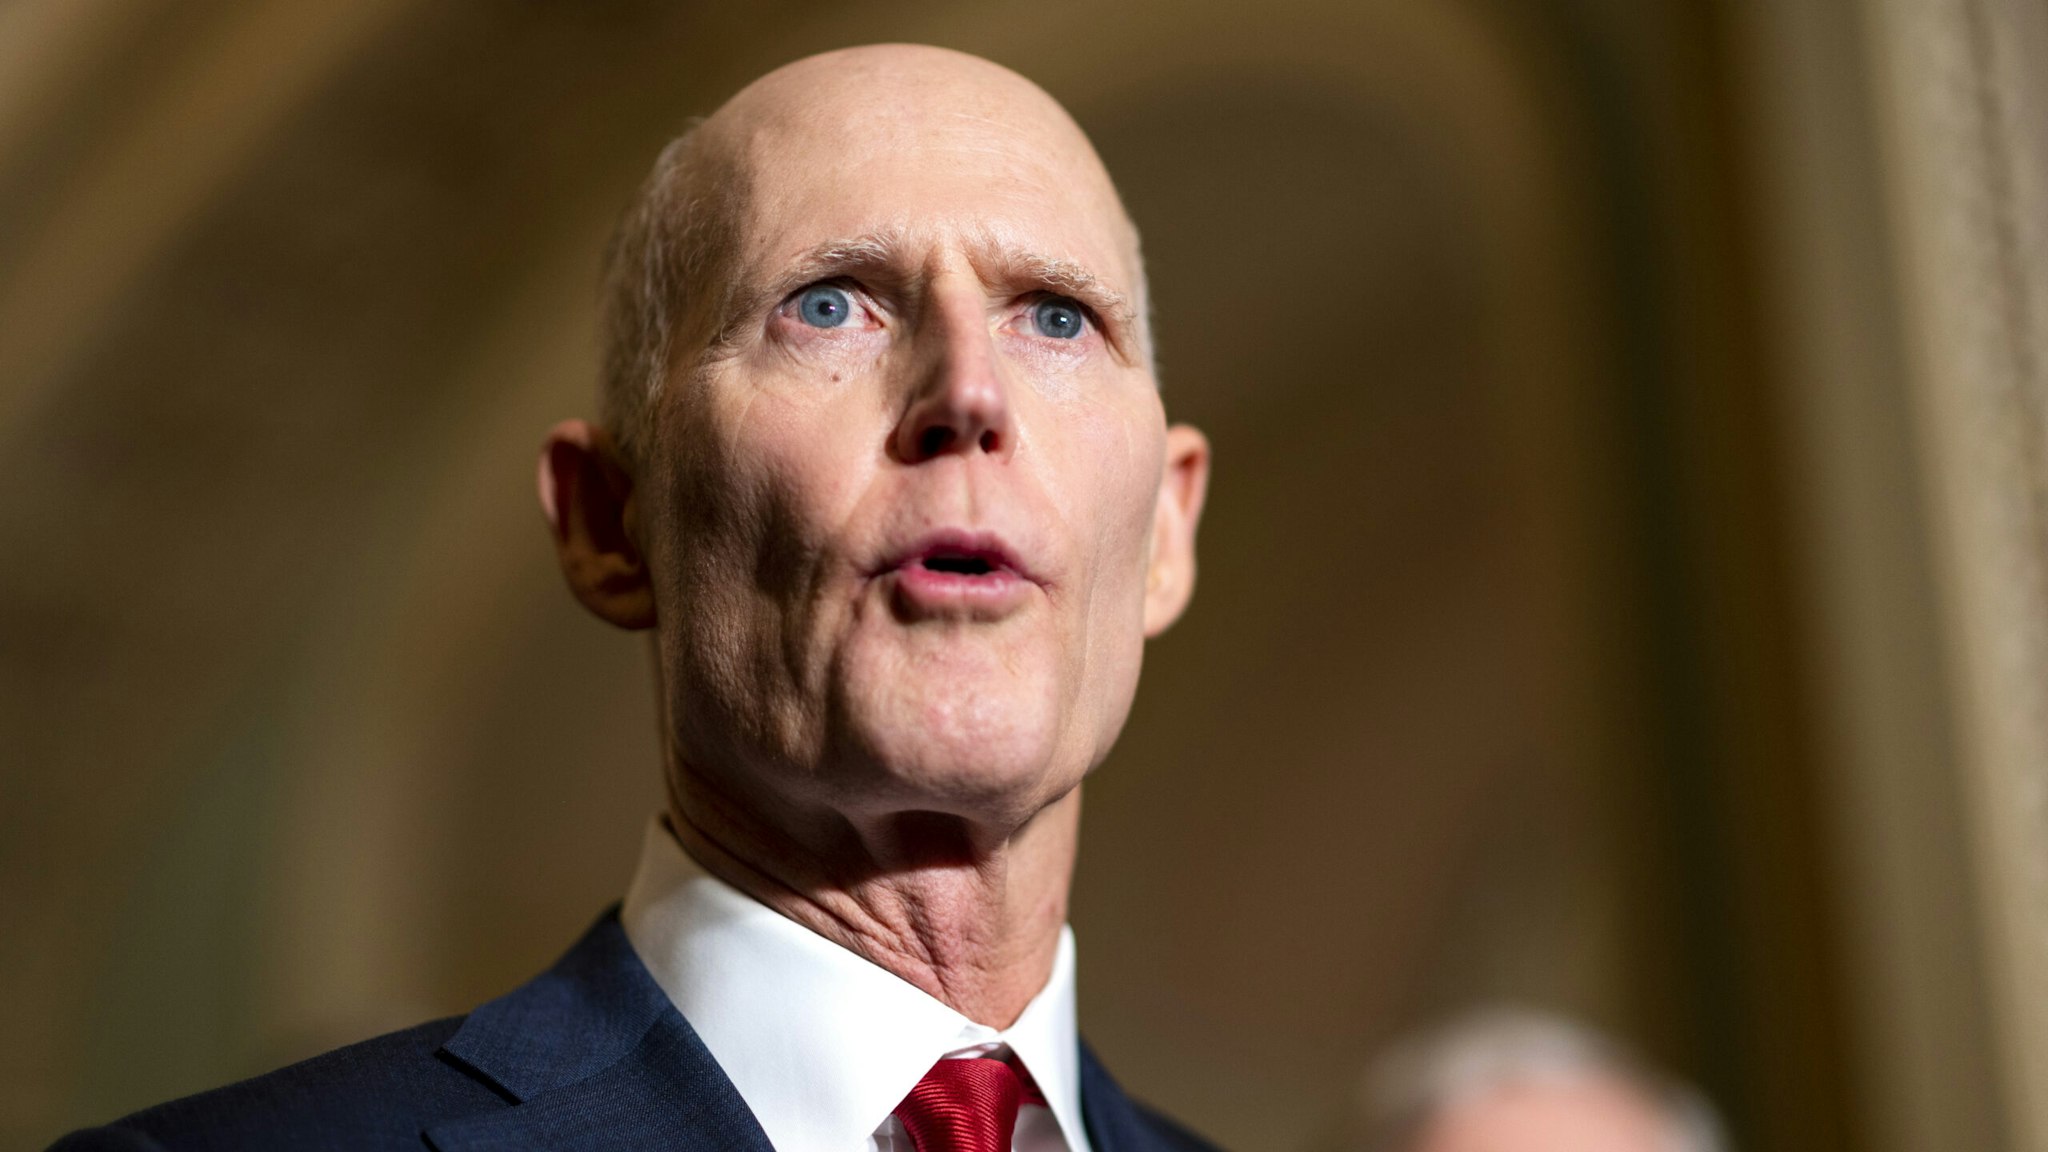 UNITED STATES - NOVEMBER 30: Sen. Rick Scott, R-Fla., speaks during the Senate Republicans news conference in the Capitol on Tuesday, Nov. 30, 2021.